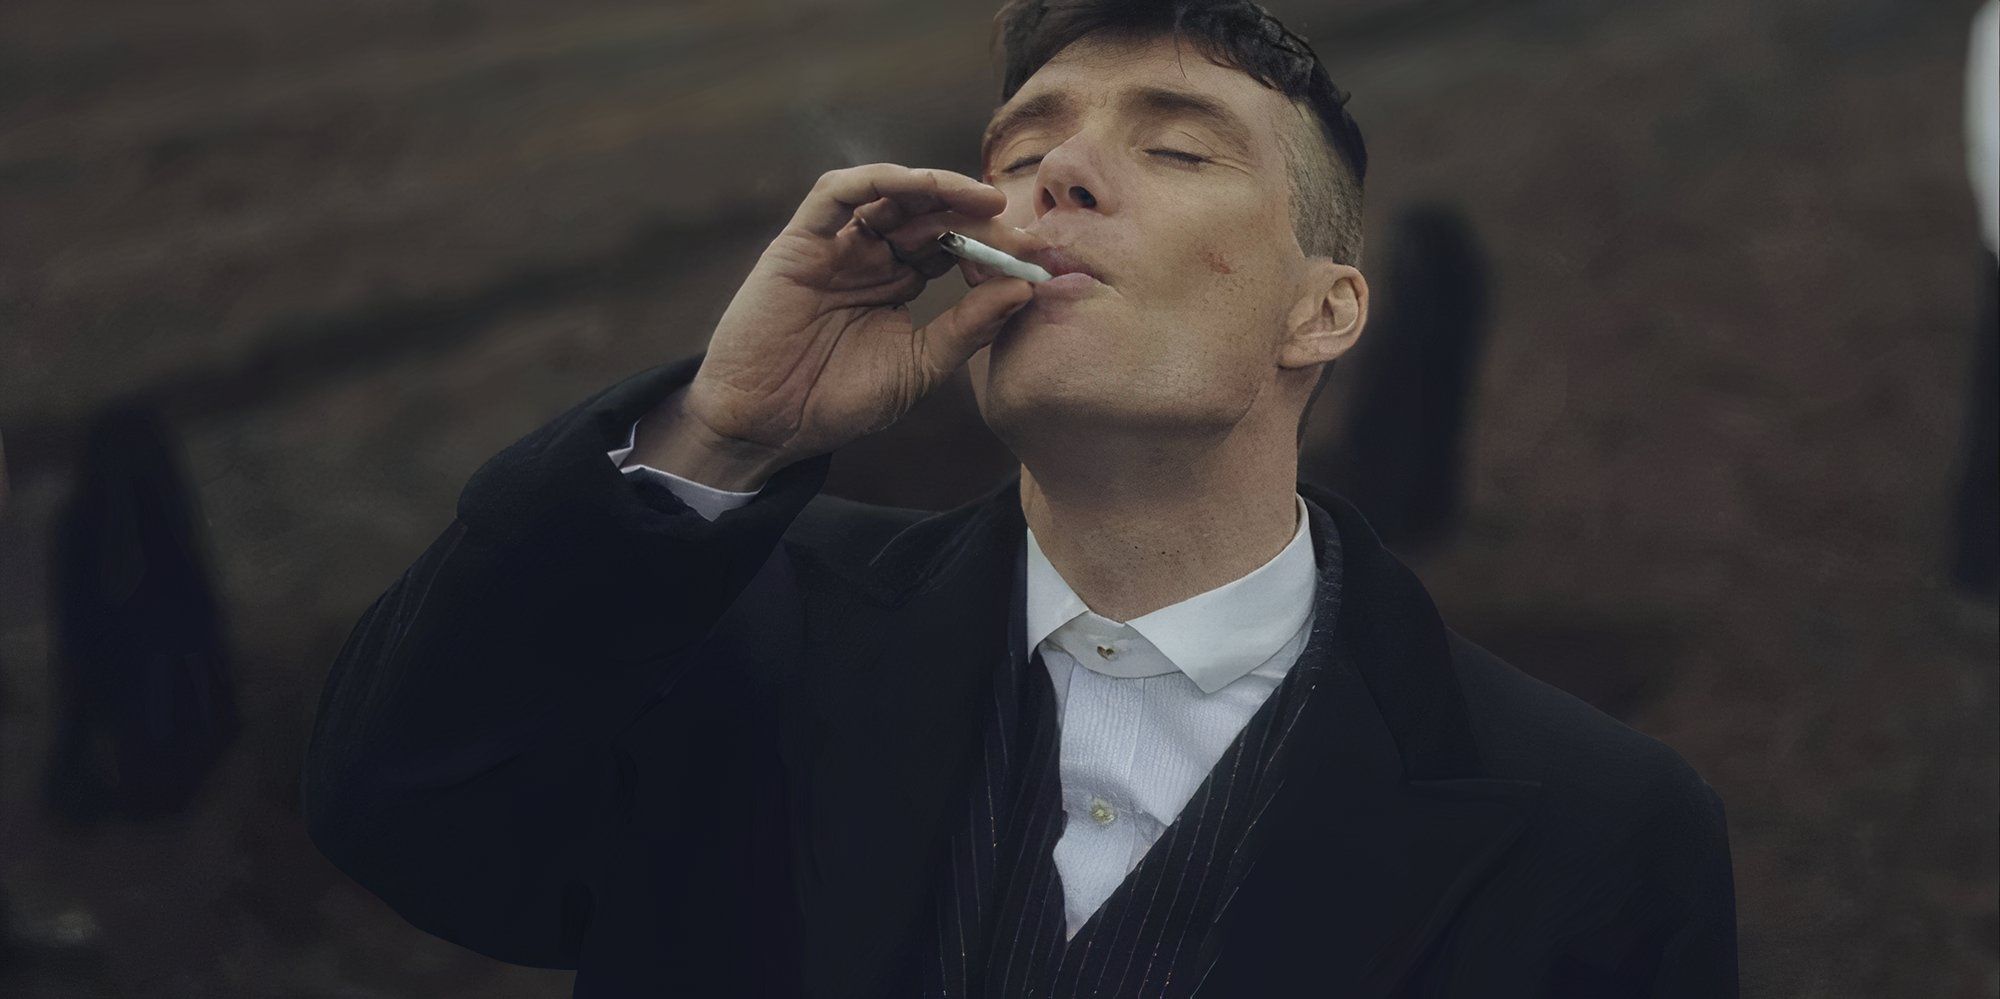 Cillian Murphy as Tommy Shelby smoking a cigarette in Peaky Blinders.